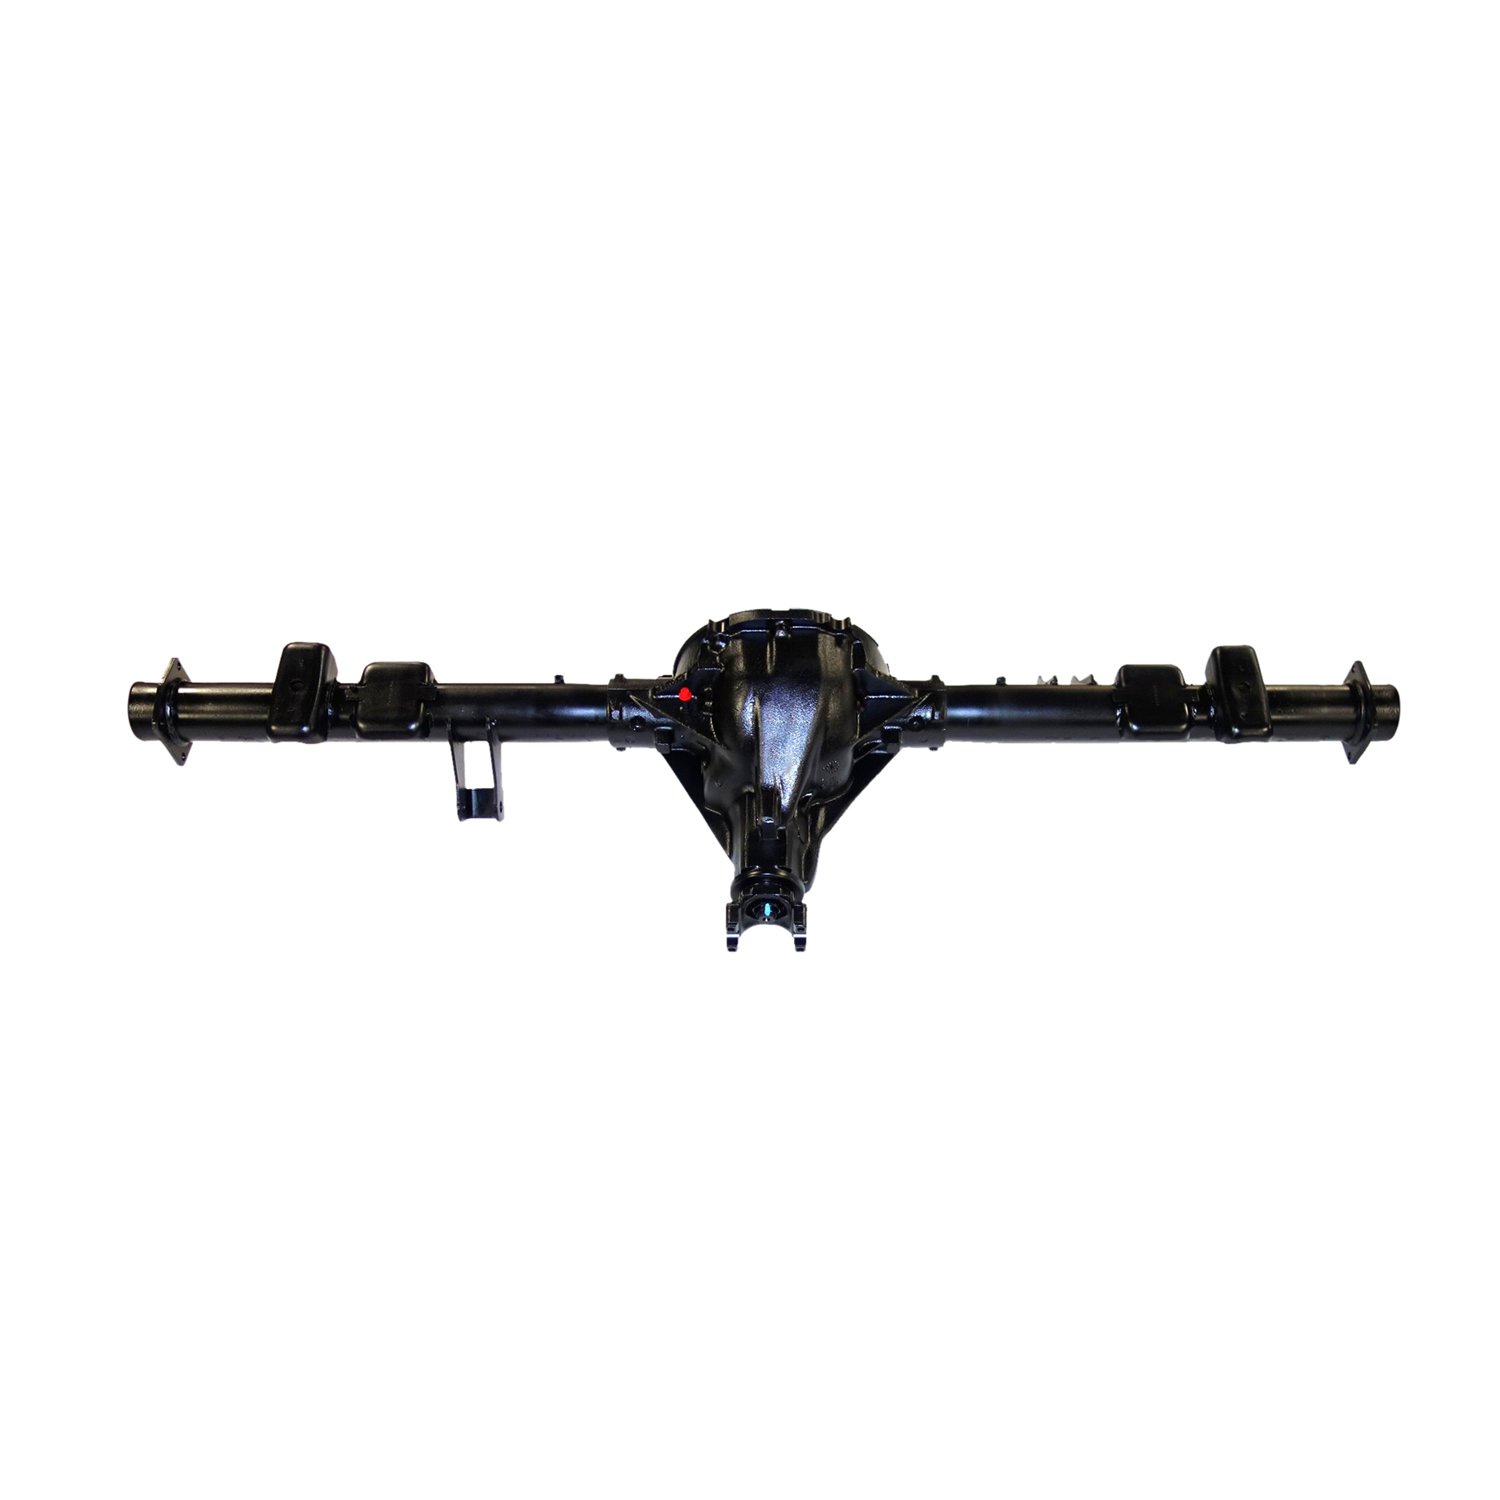 Remanufactured Complete Axle Assy for GM 8.5" 88-99 GMC 1500 Pickup 3.42 , 2wd, Posi LSD